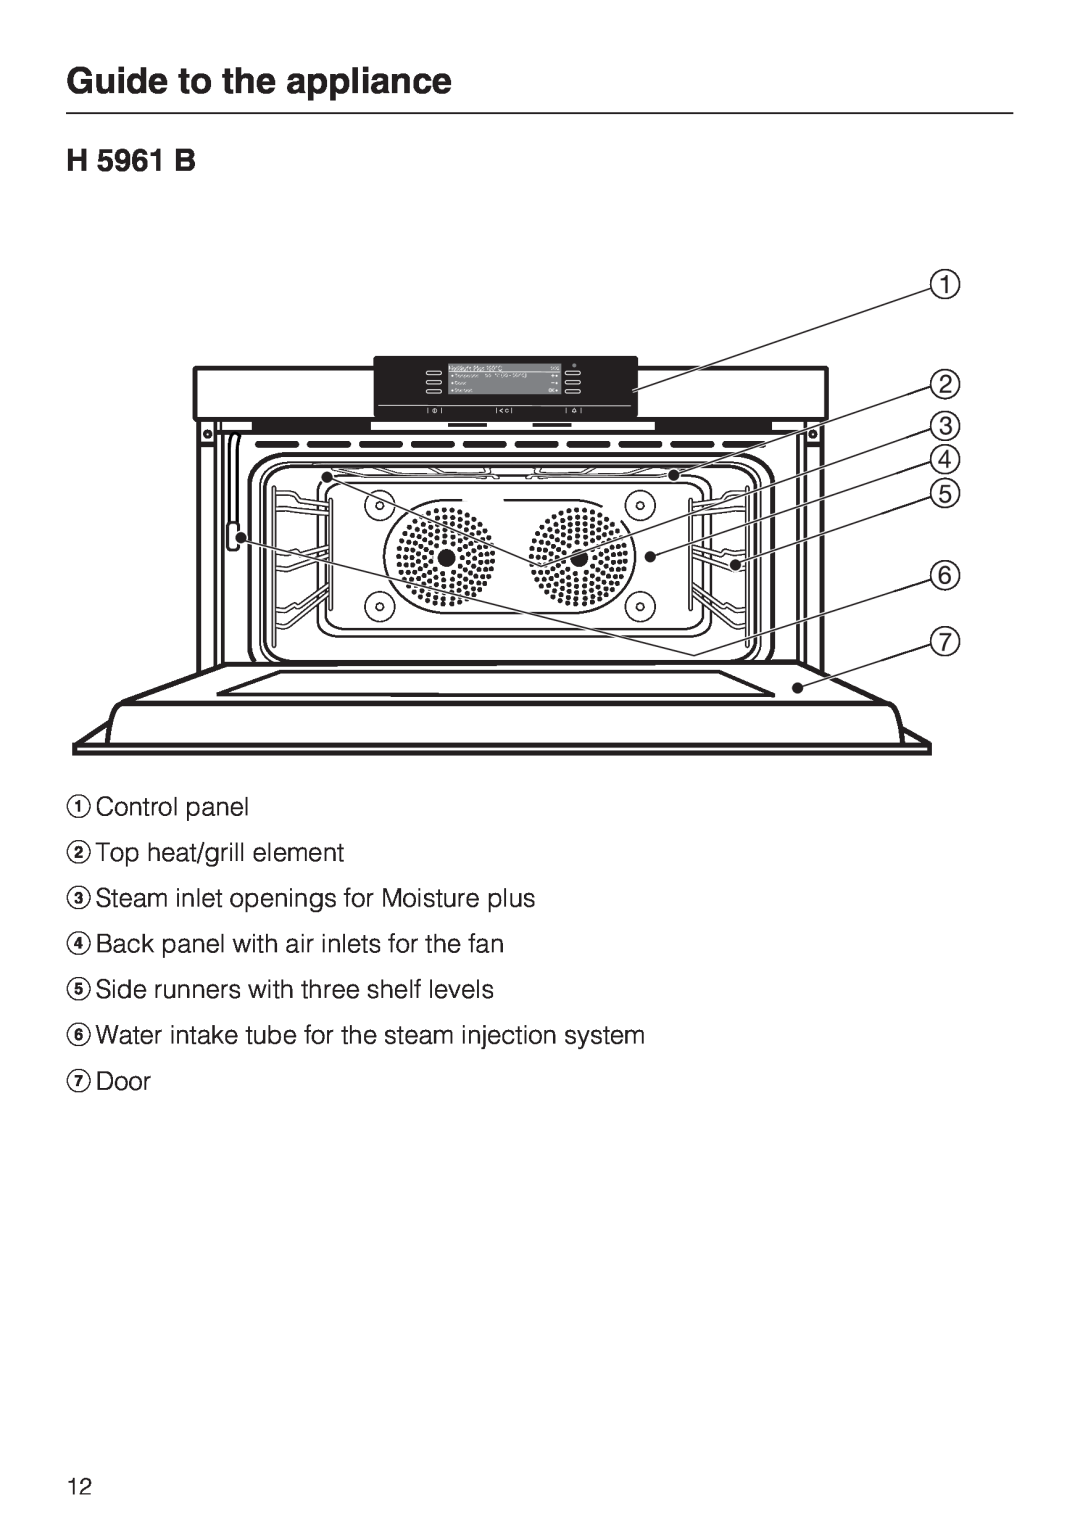 Miele H 5961 B installation instructions Guide to the appliance 